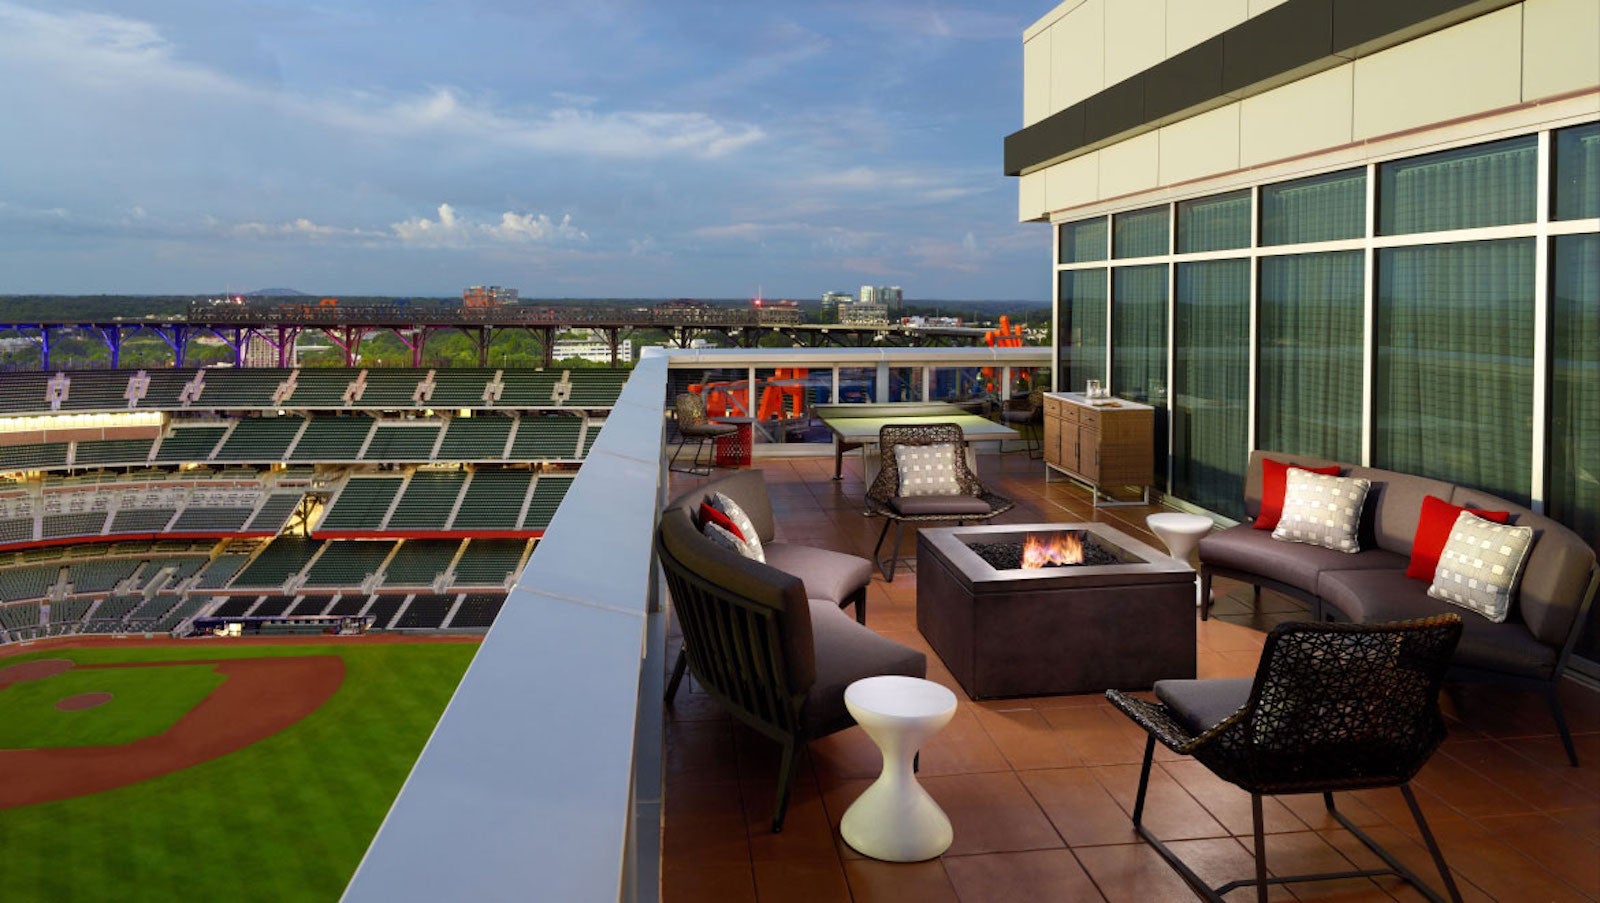 10Best Hotels for Baseball Fanatics To Bunk Up In